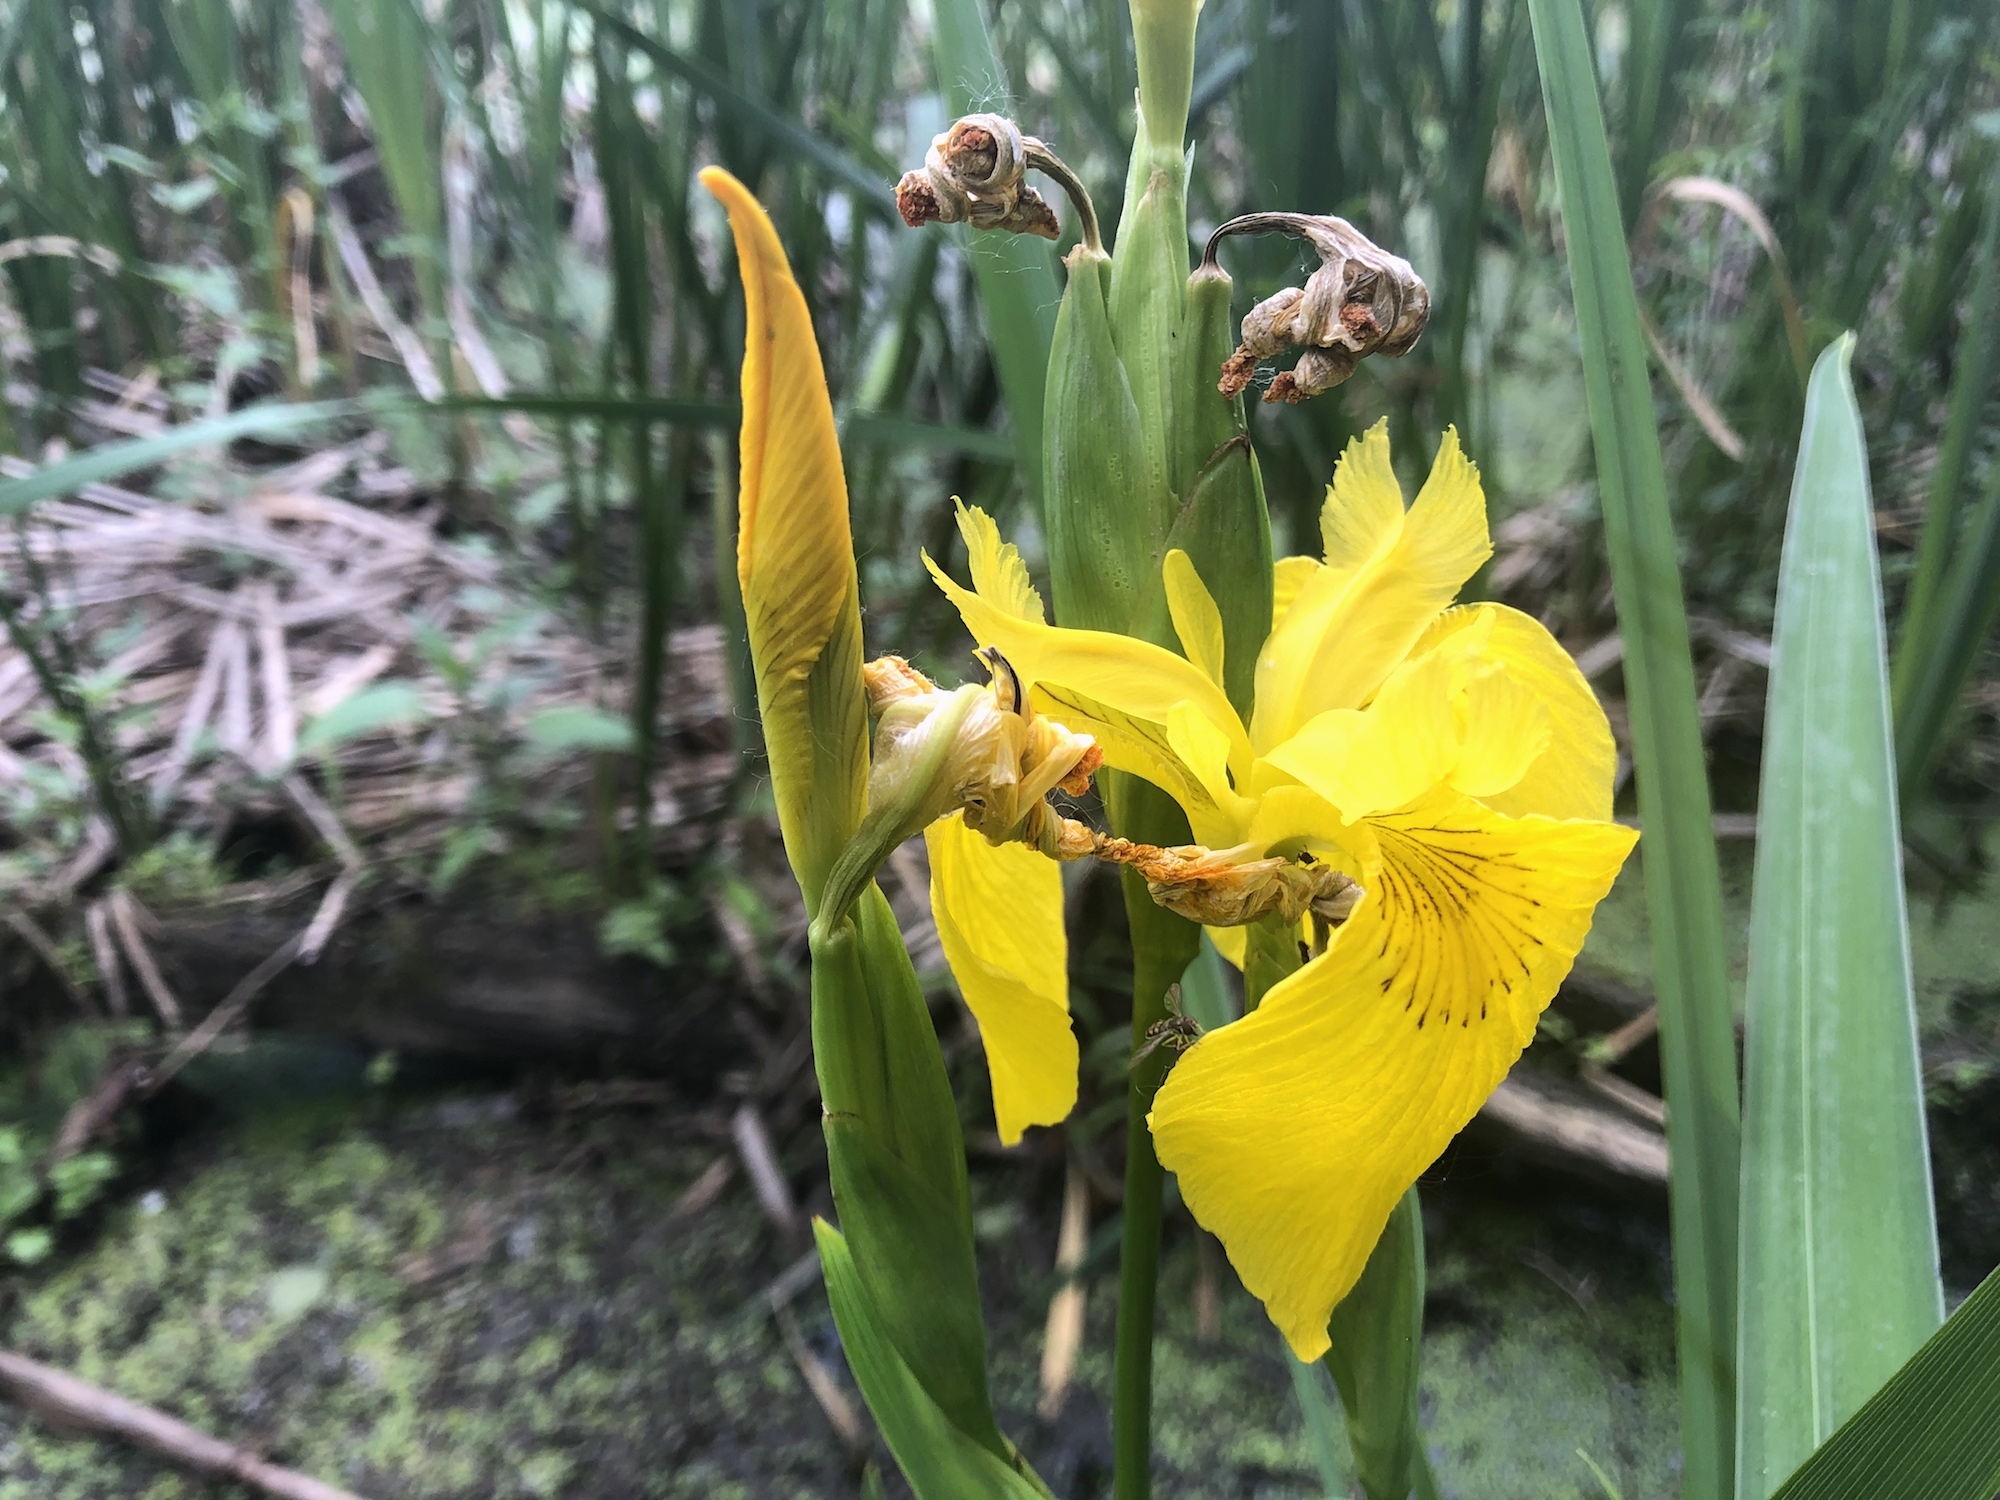 Yellow Flag Iris by Cattails on Lake Wingra on June 18, 2019.